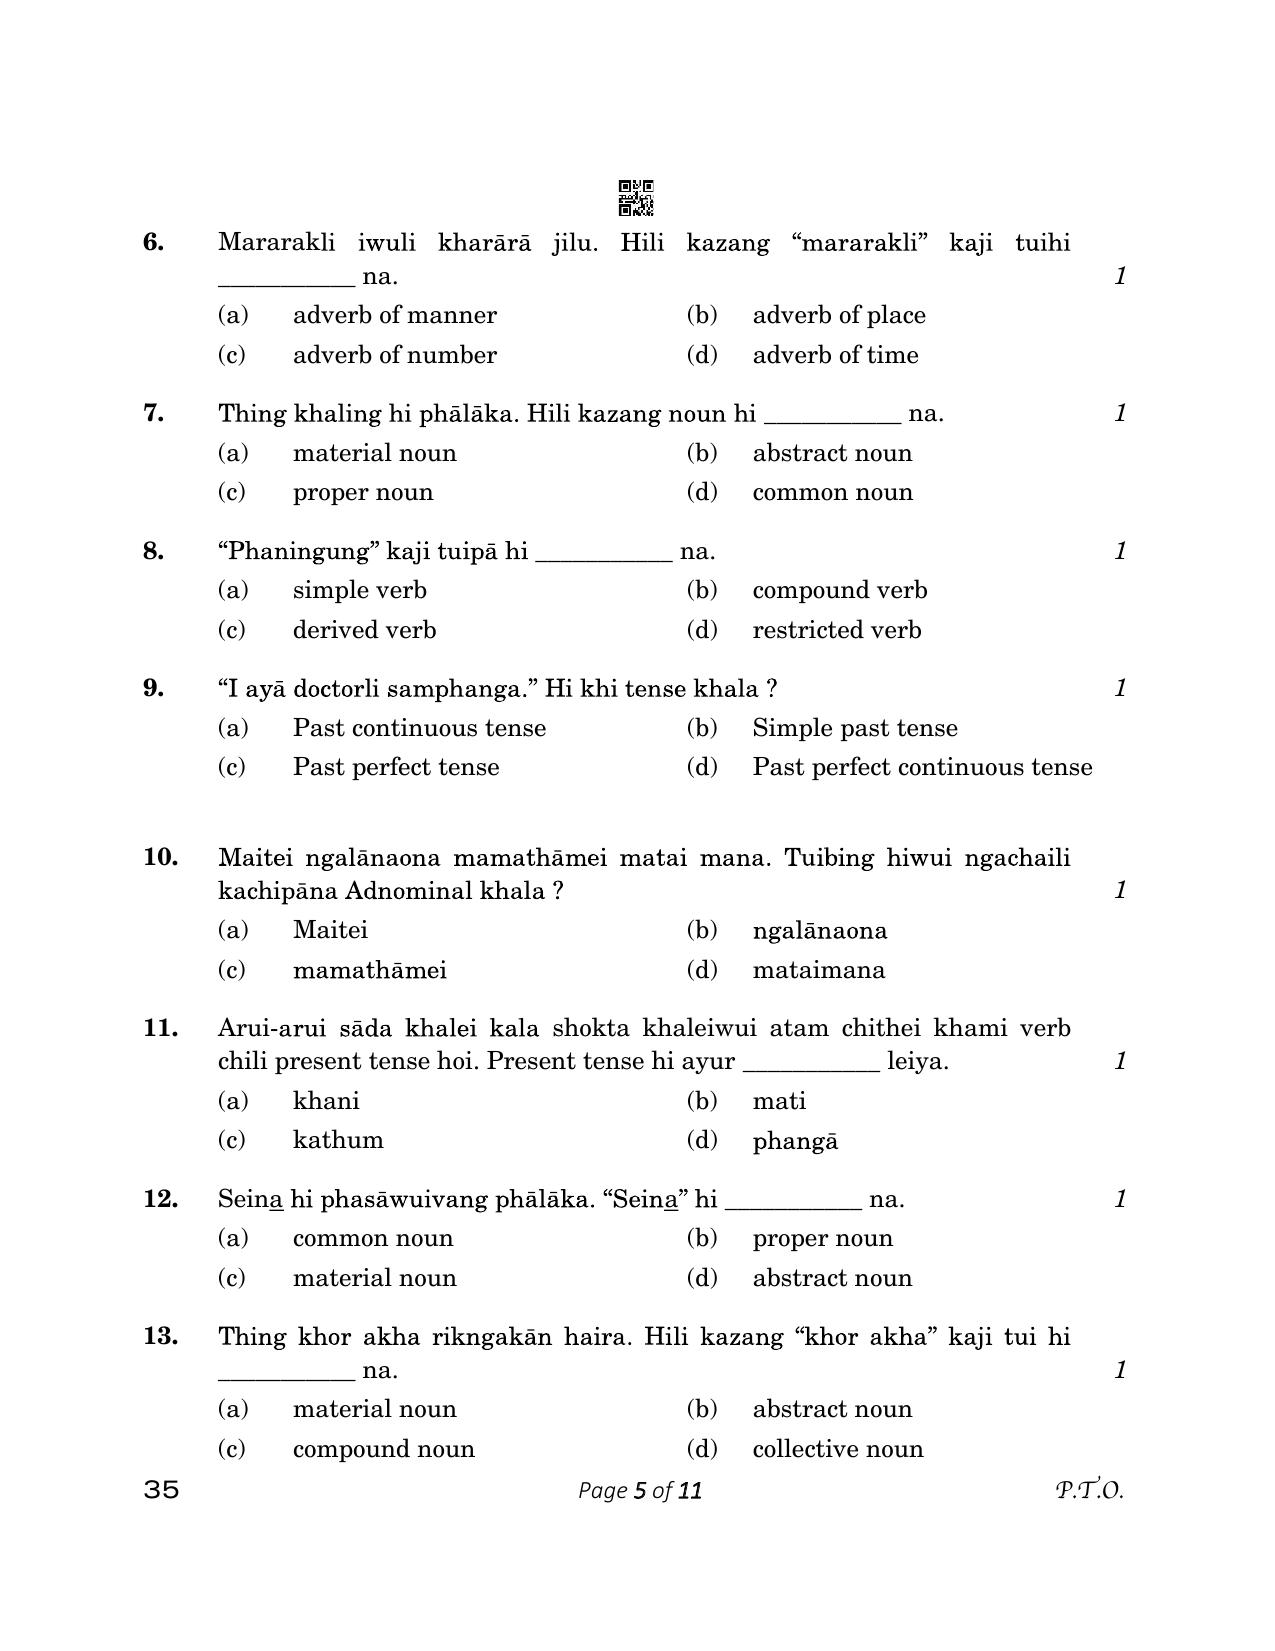 CBSE Class 12 35_Tangkhul 2023 Question Paper - Page 5